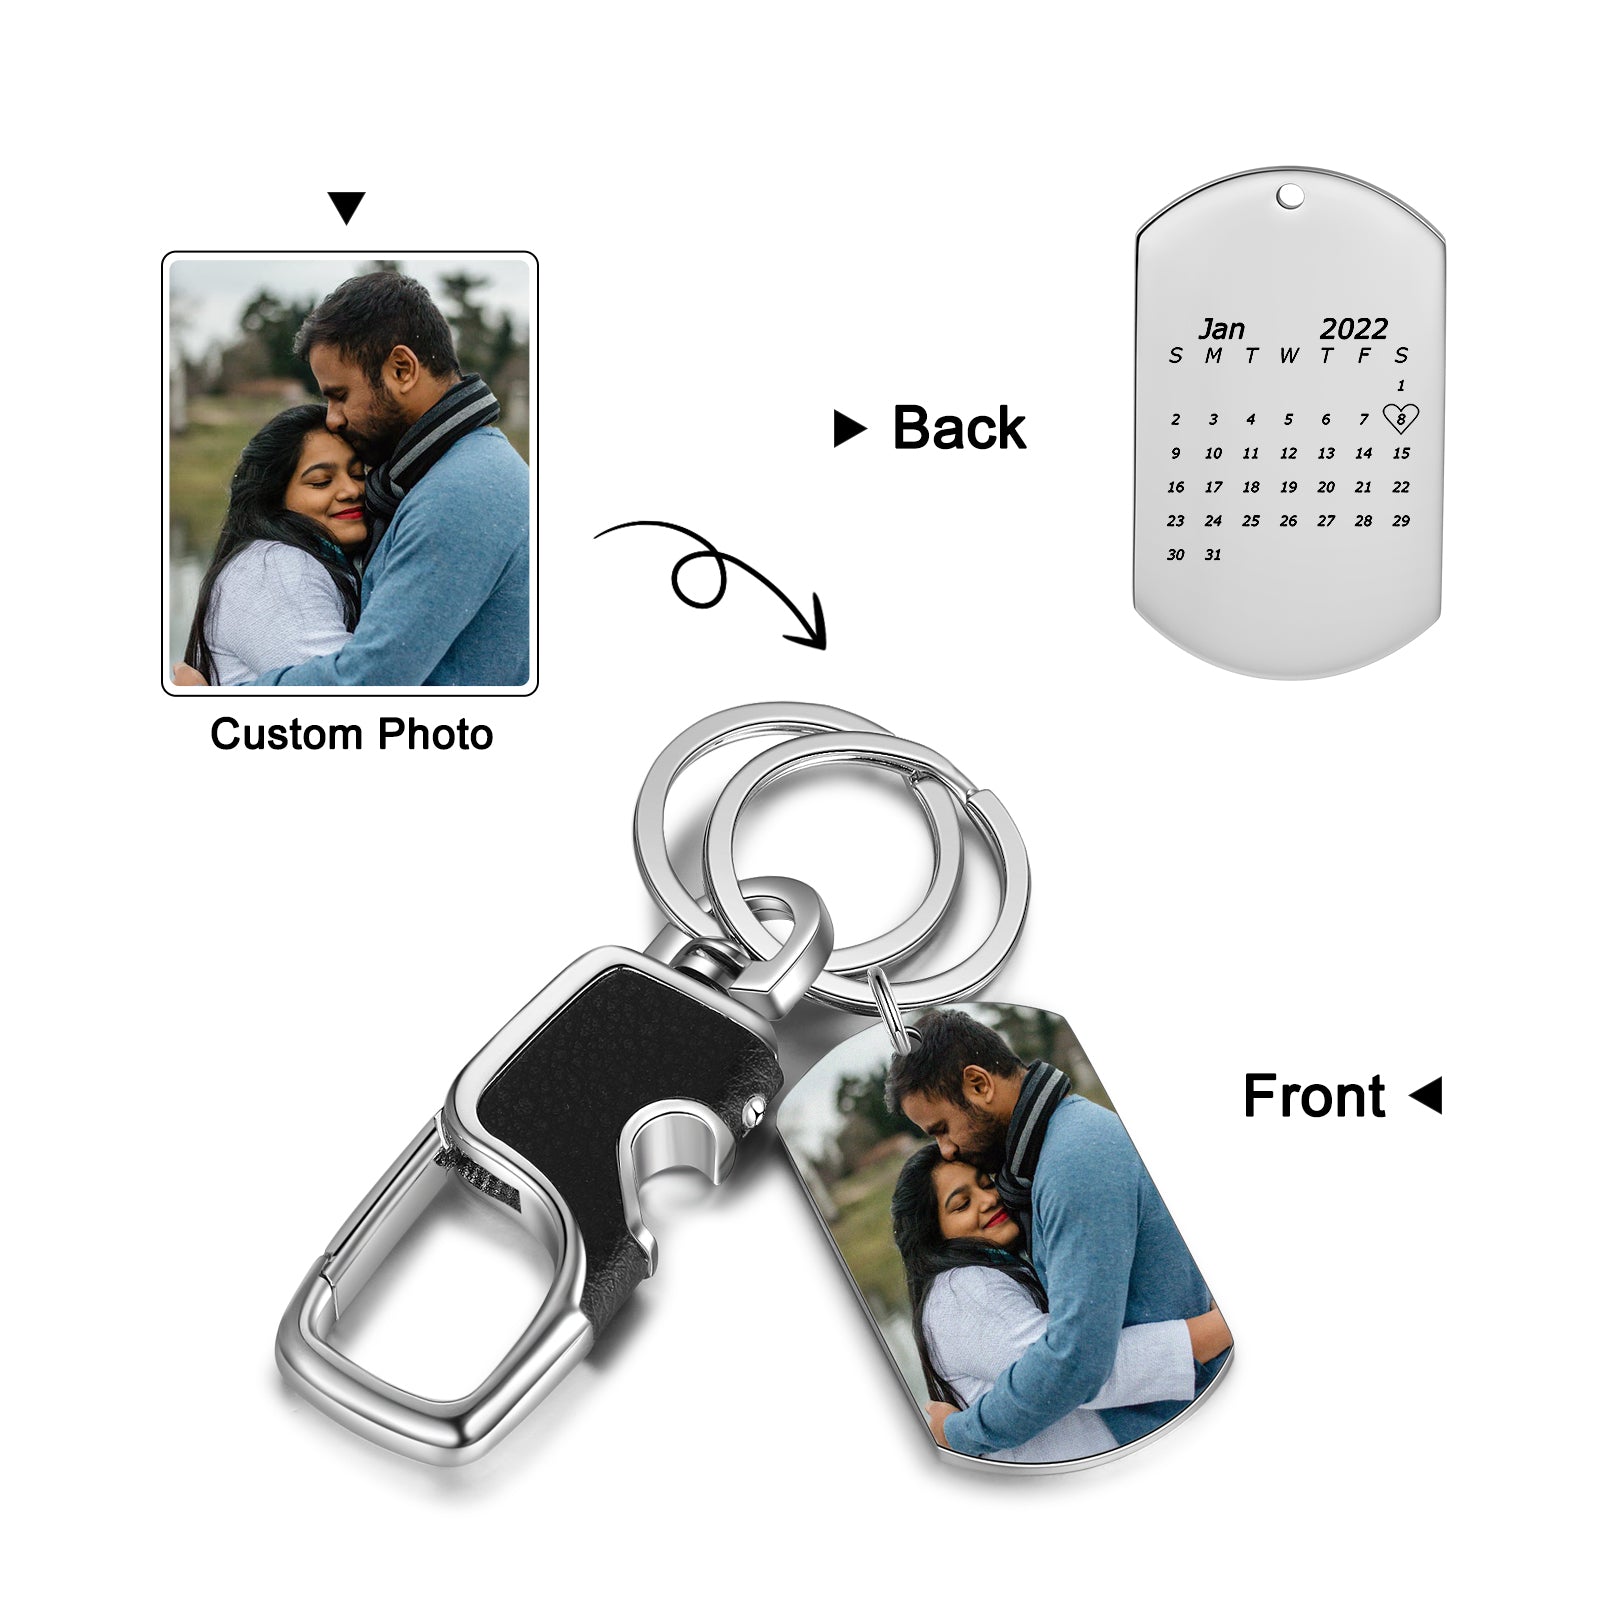 JO Custom Keychain Personalized Photo and Date Keychain With Light and Bottle Opener